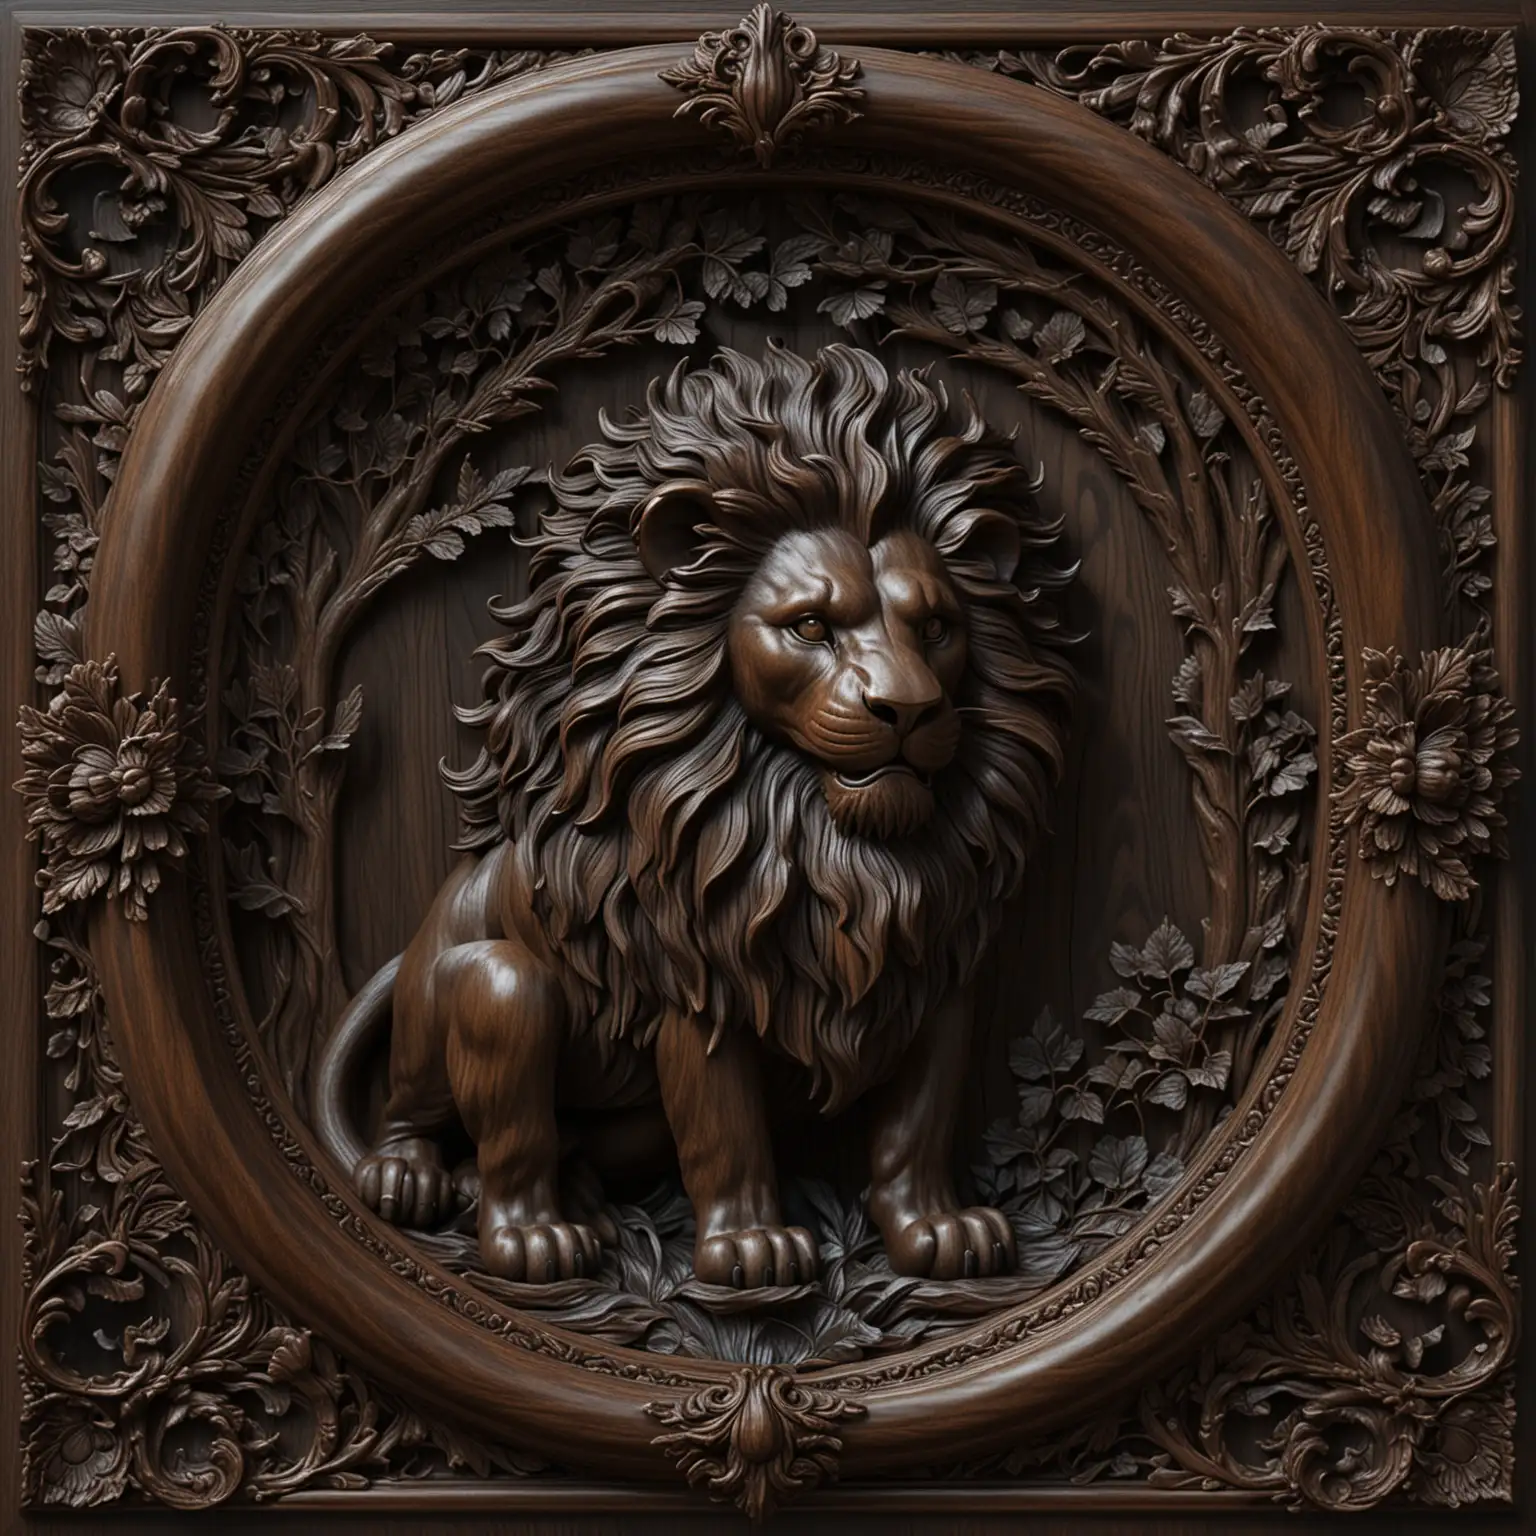 SEAMLESS 3D FINELY CARVED DARK WOOD  SURROUNDED BY AN INTRICATELY CARVED FRAME IN THE STYLE OF THE LION THE WITCH AND THE WARDROBE
